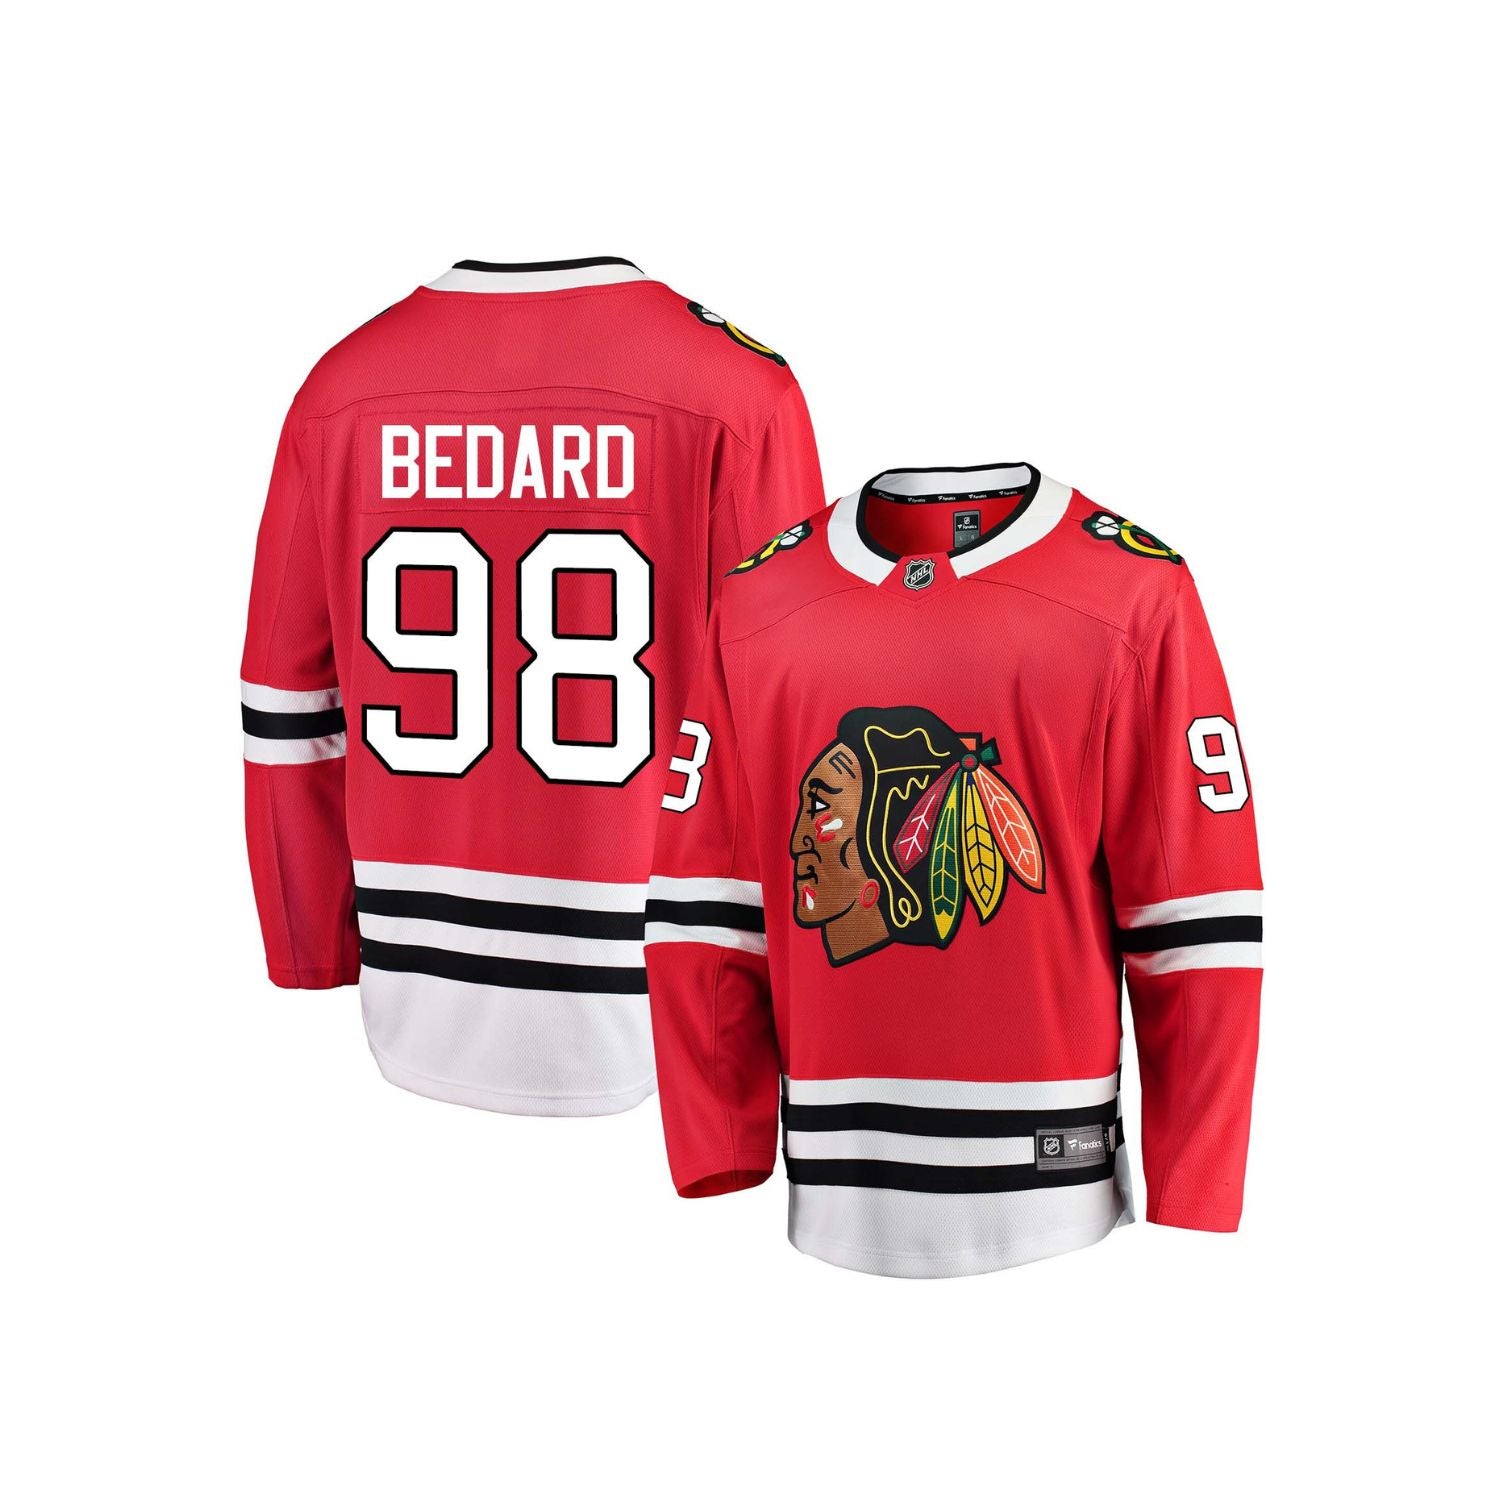 CERTIFIED GRAIL! A personal favorite Ultra Rare Authentic Chicago Blackhawks  3rd Jersey from 08-09…never thought I'd find one (let alone NWT) but it's  here and its real! Out to the stitcher on